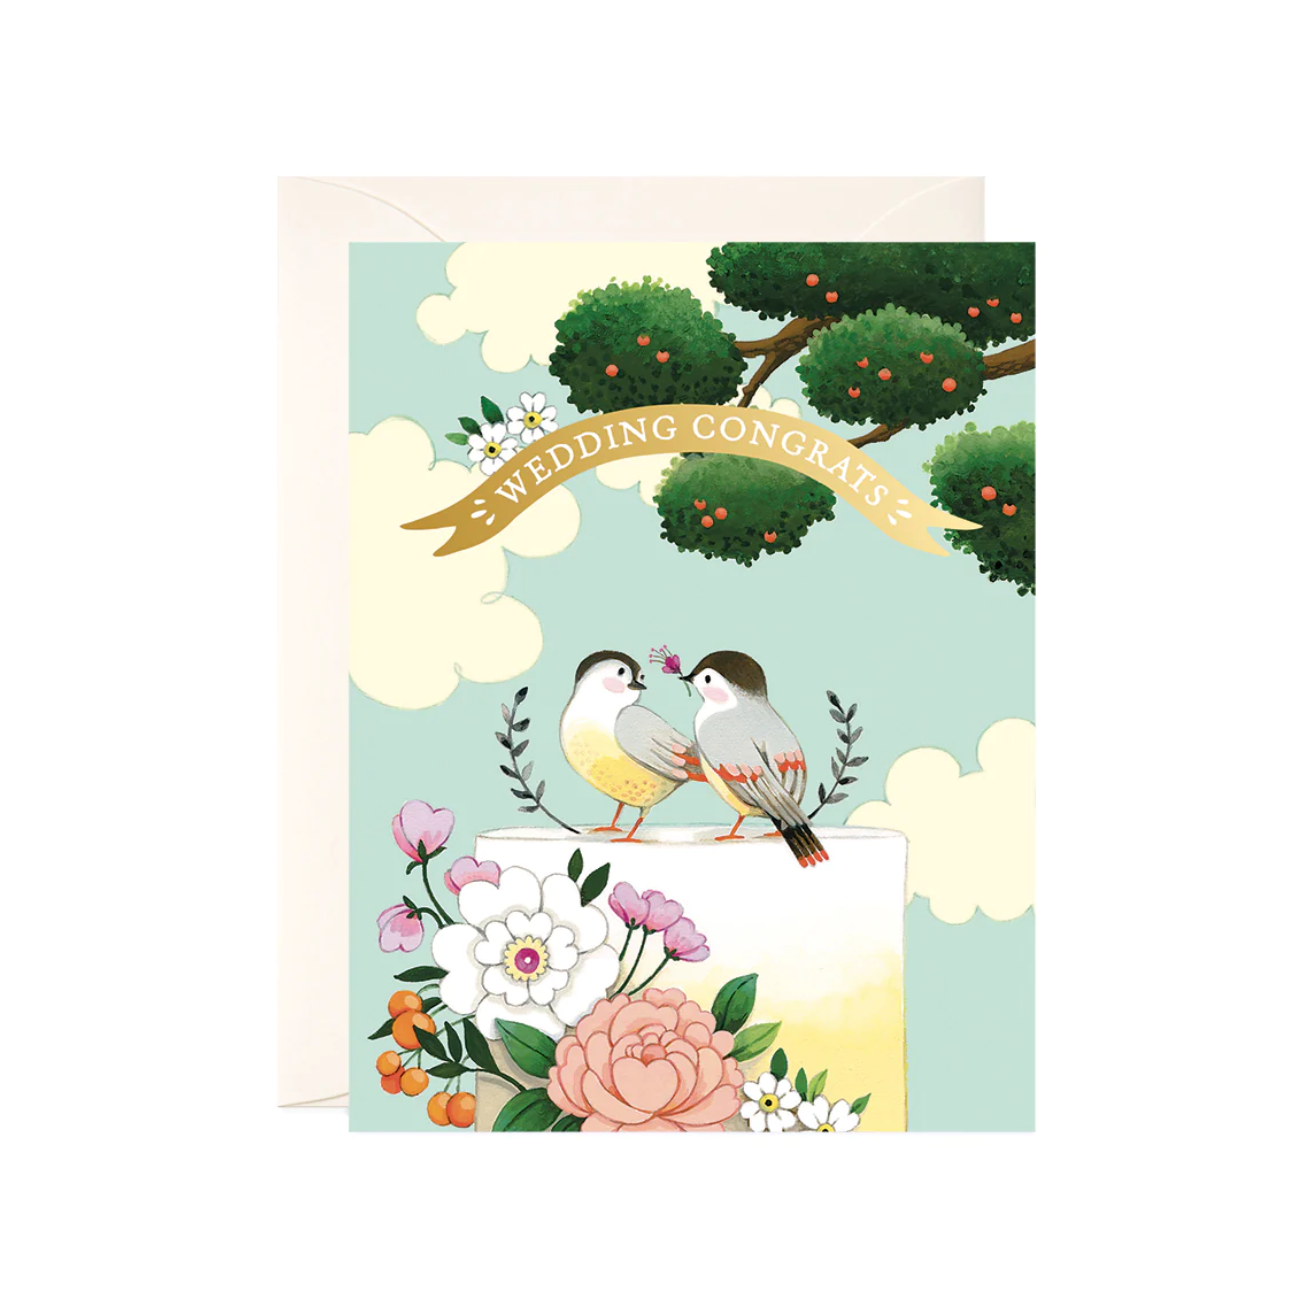 sky blue greeting card with illustration of apple tree and wedding cake with flowers and birds sitting on top with gold banner that reads "wedding congrats"